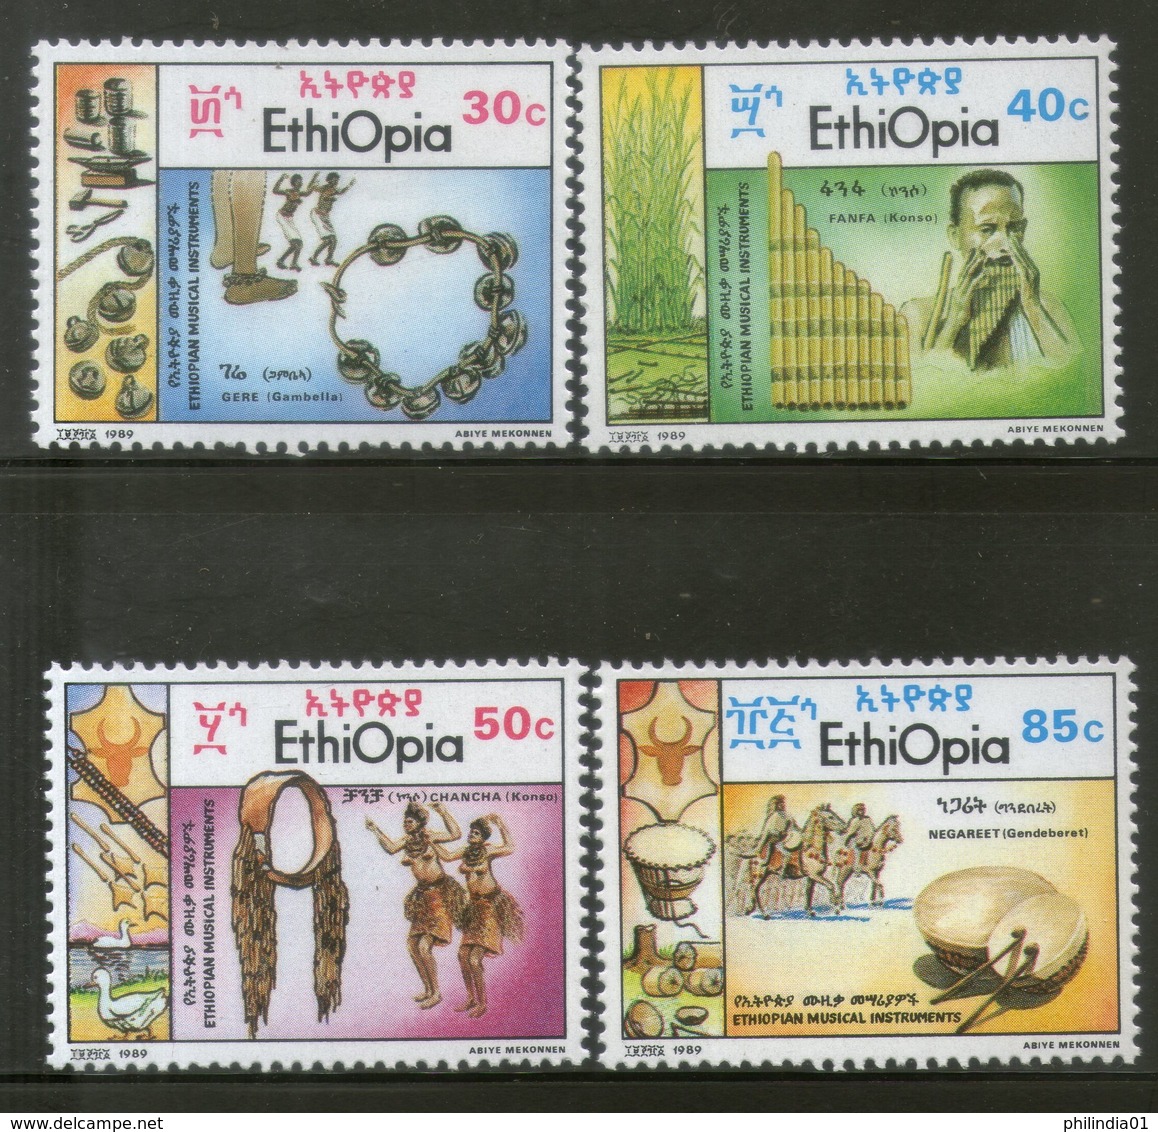 Ethiopia 1989 Traditional Musical Instruments Music Sc 1241-44 MNH # 630 - Musique